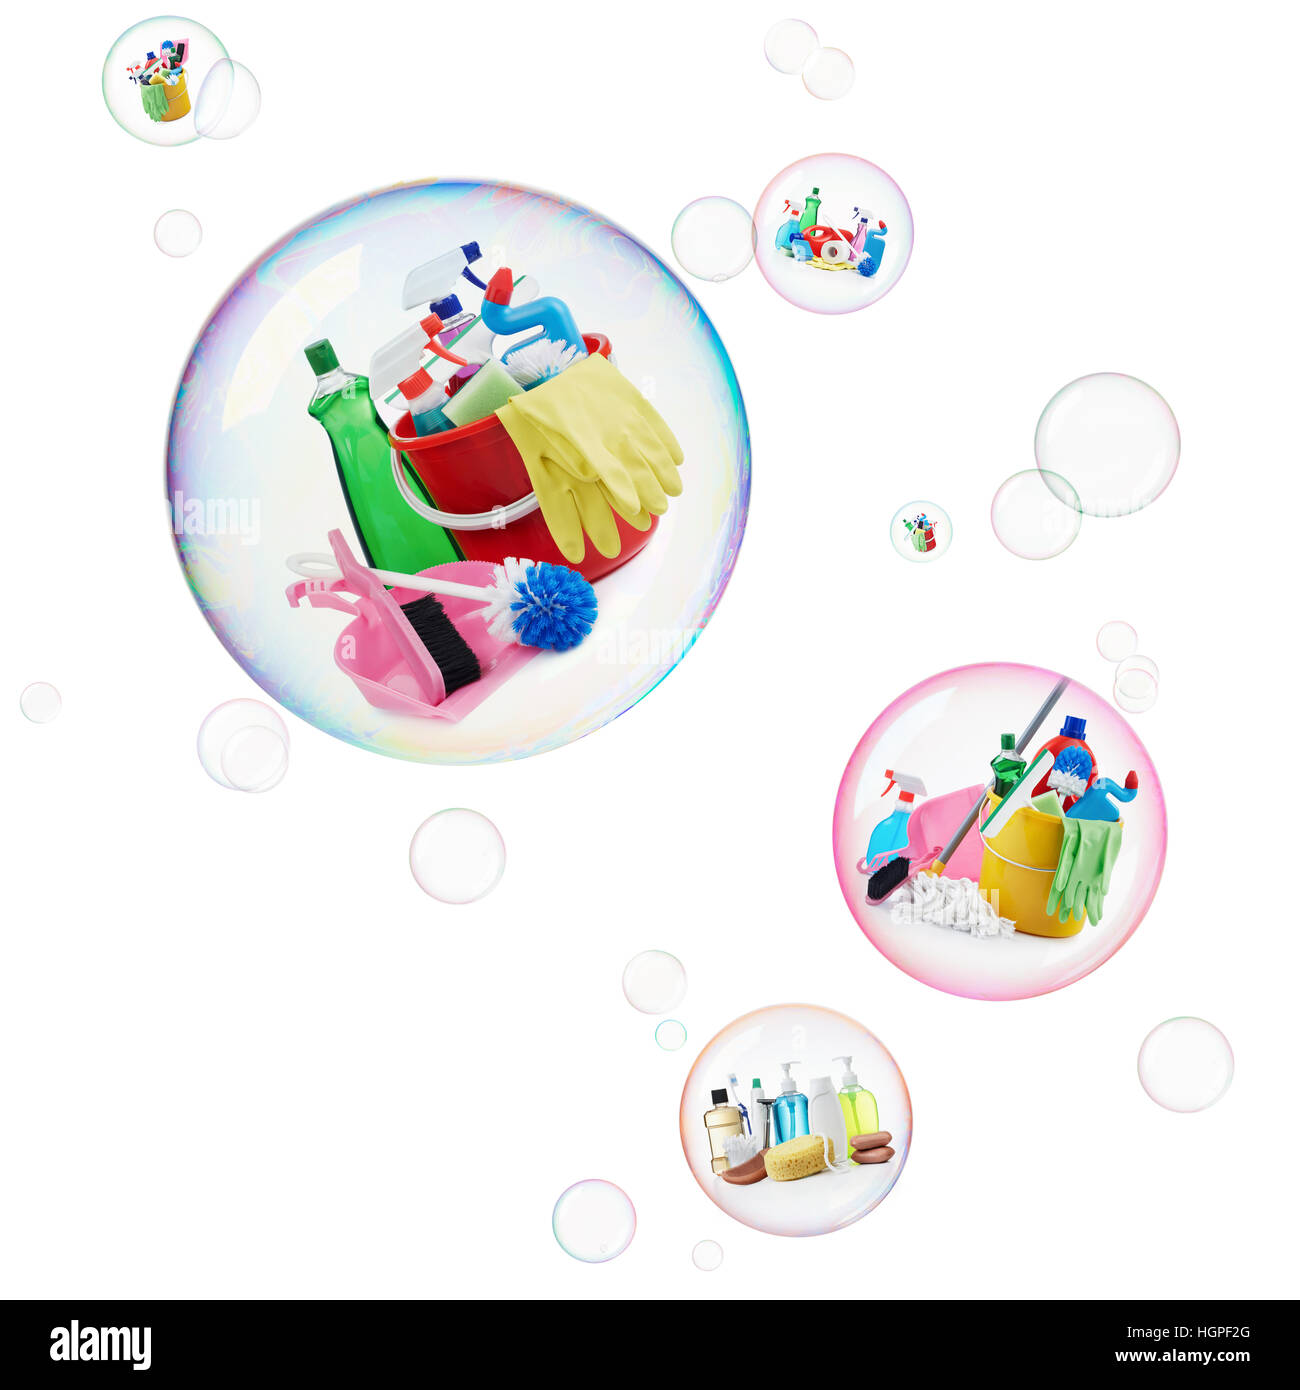 variety of cleaning products and toiletries inside bubbles Stock Photo